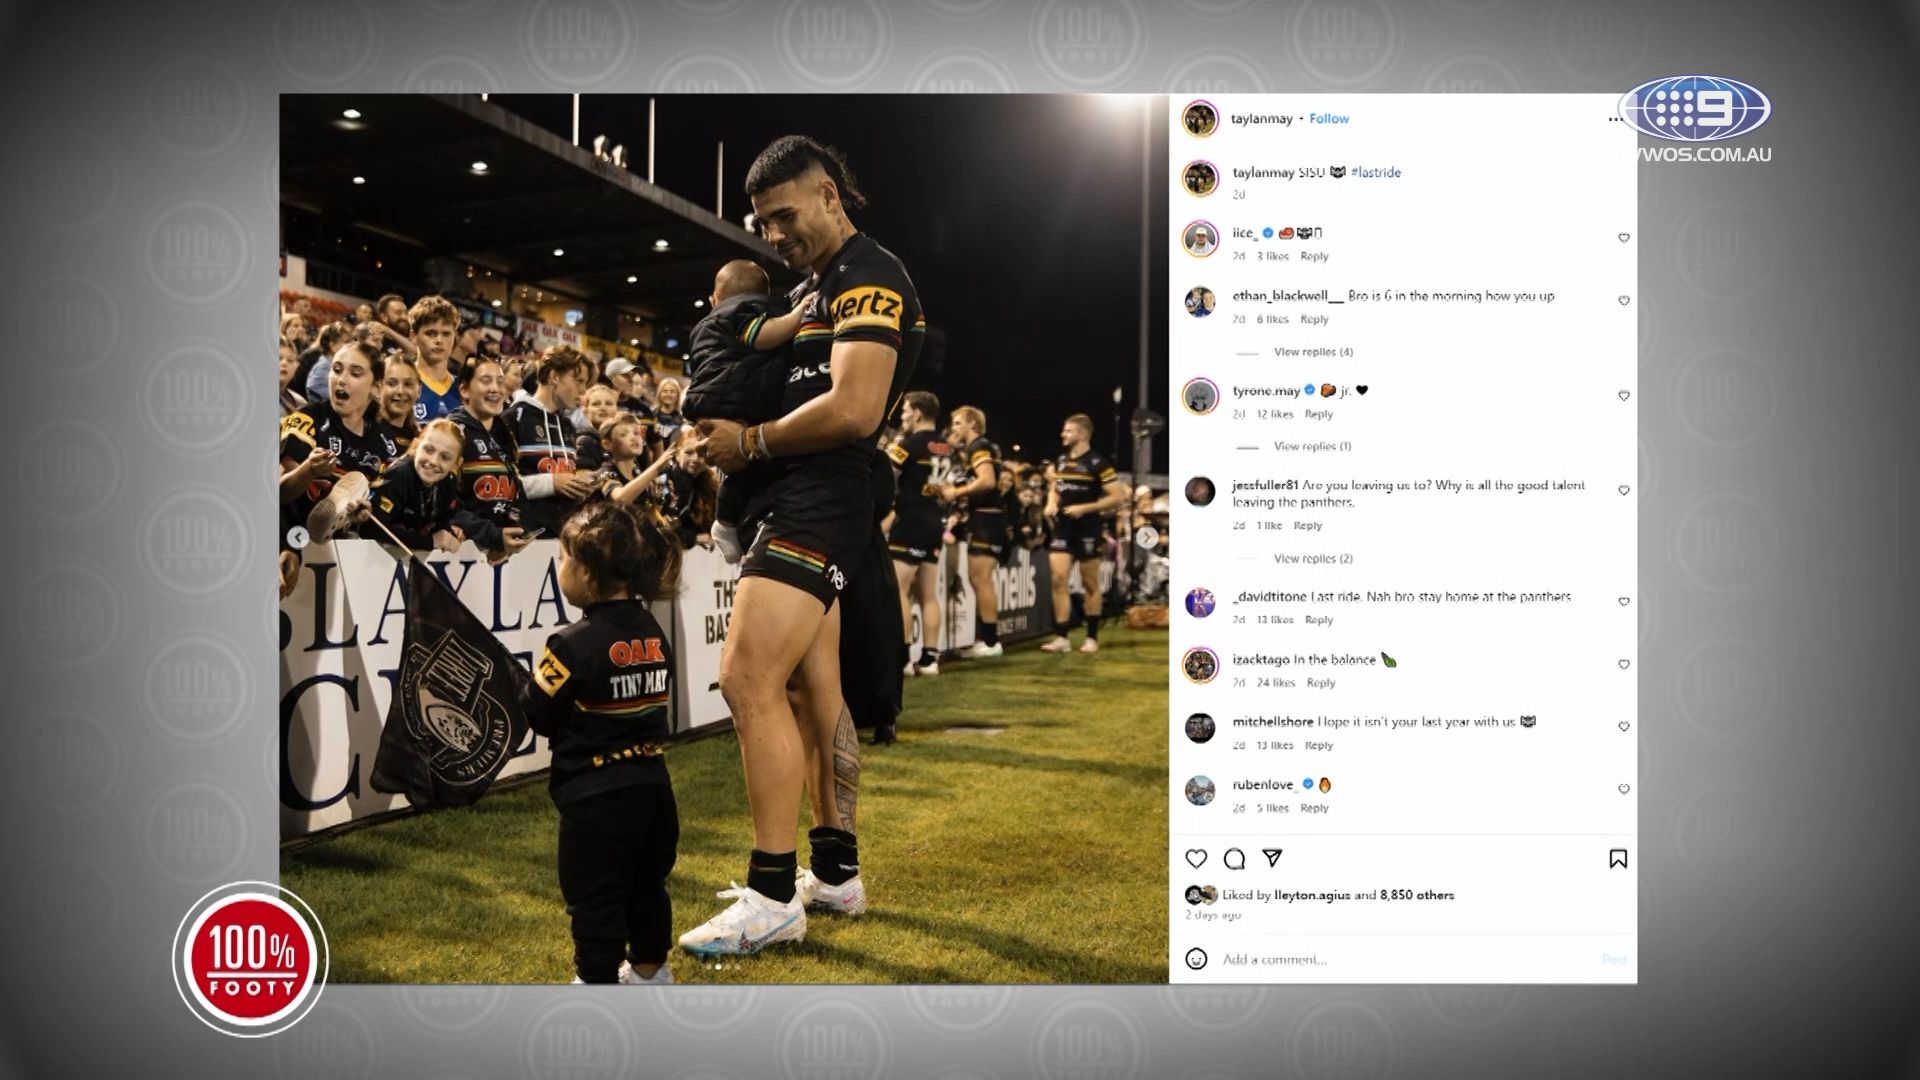 Three clubs reportedly interested in Panthers star after cryptic Instagram post